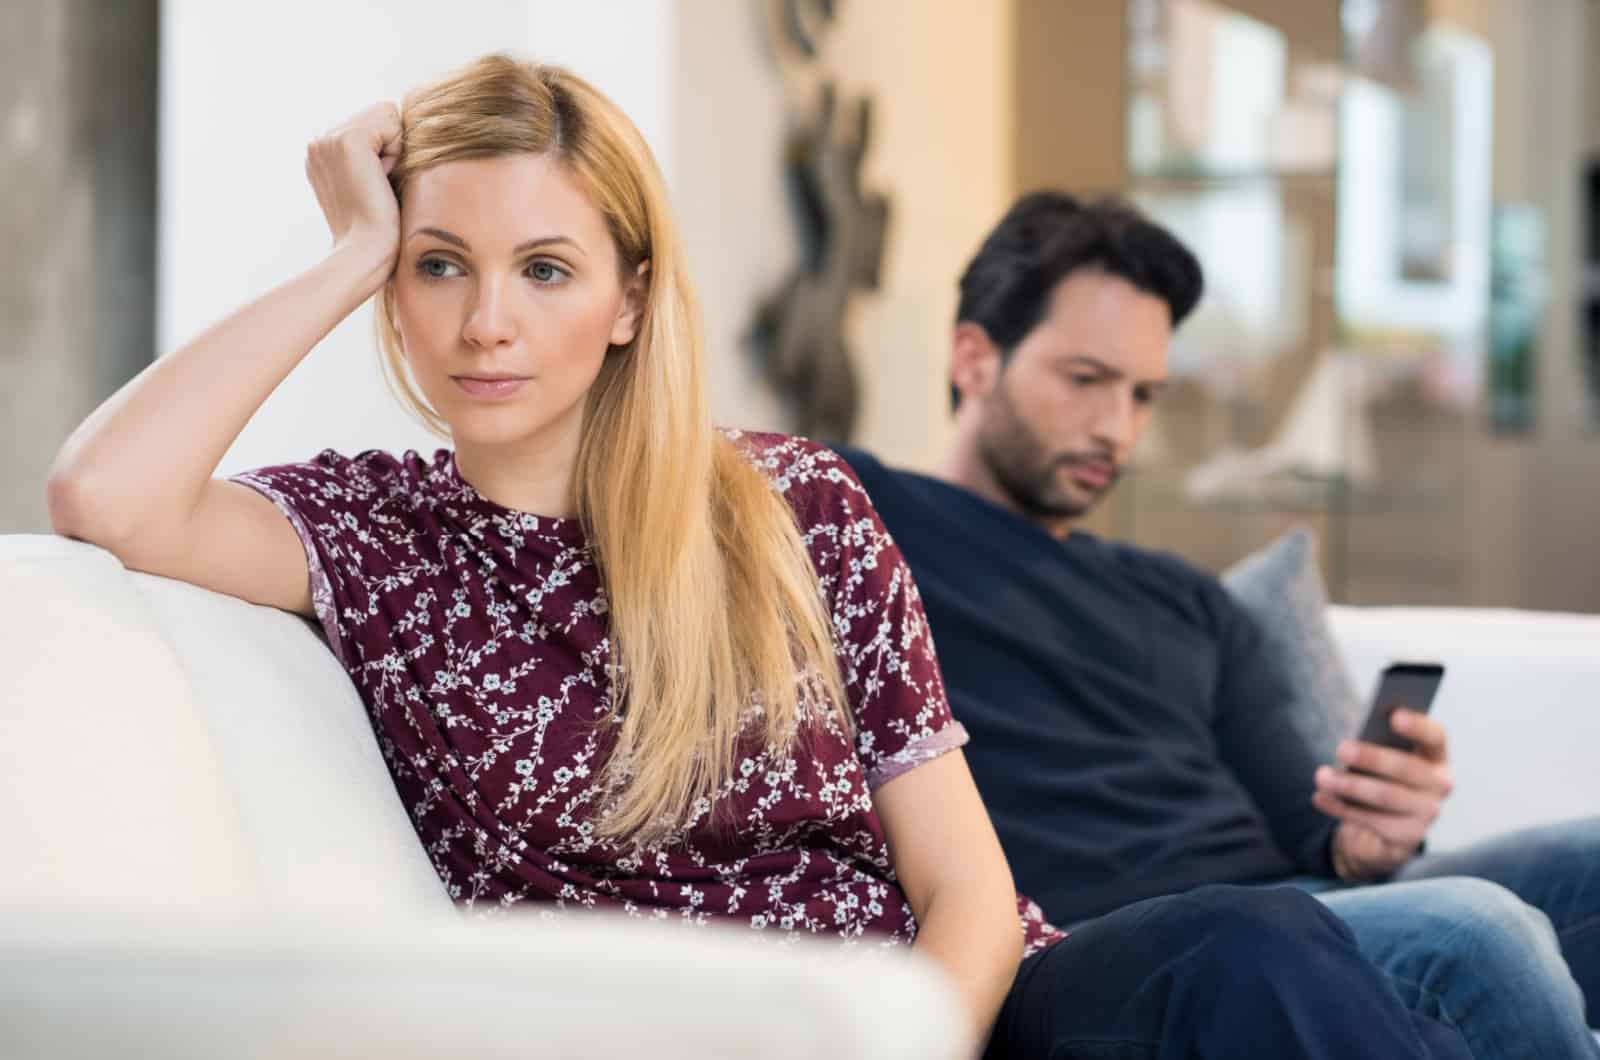 woman feeling neglected as her boyfriend is using phone